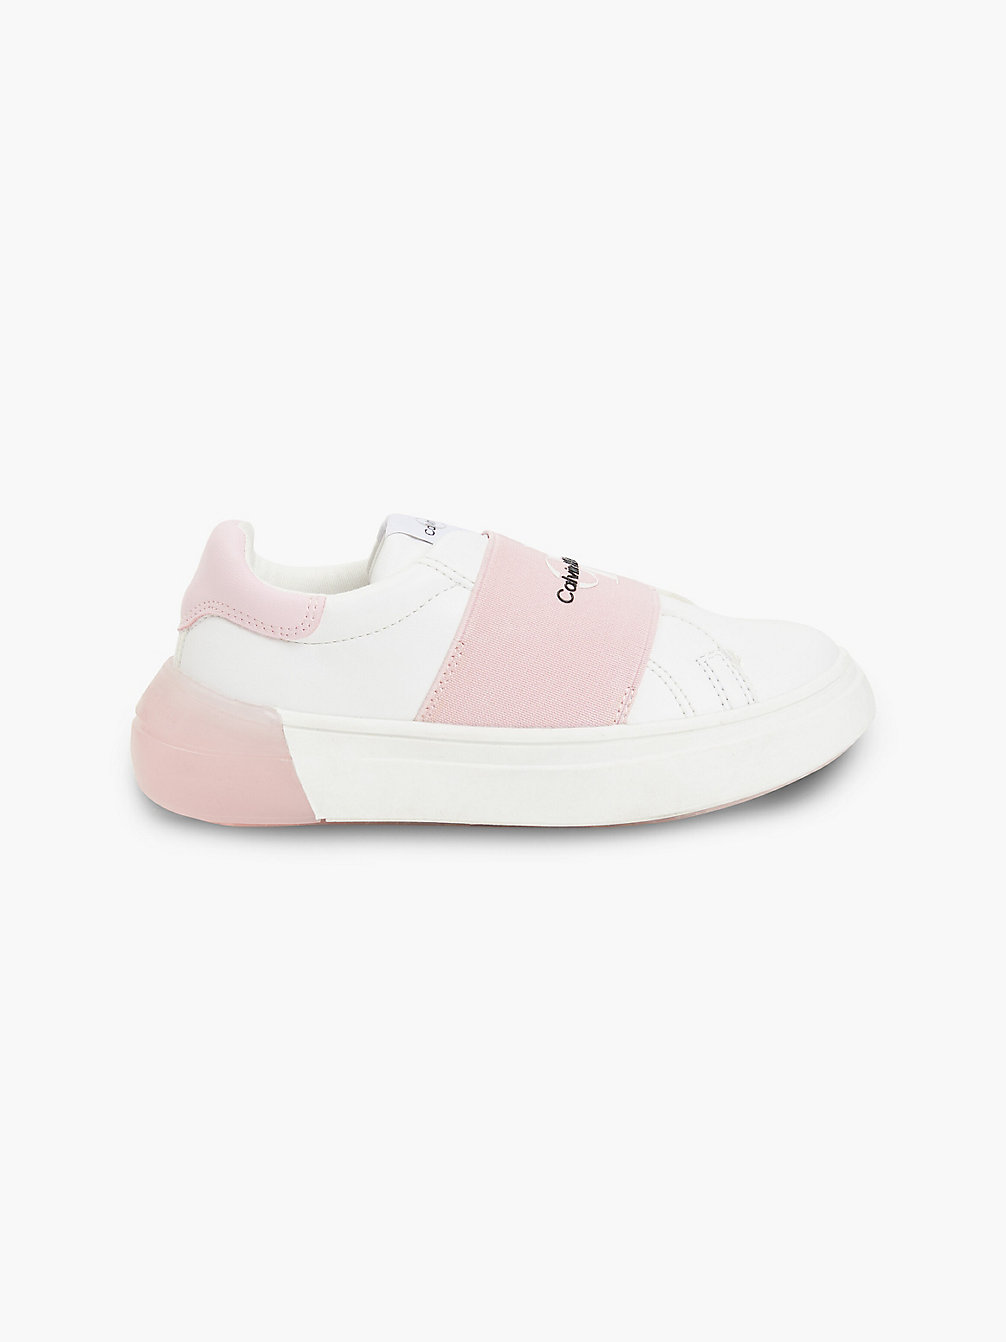 WHITE/PINK > Recycelte Sneakers > undefined girls - Calvin Klein